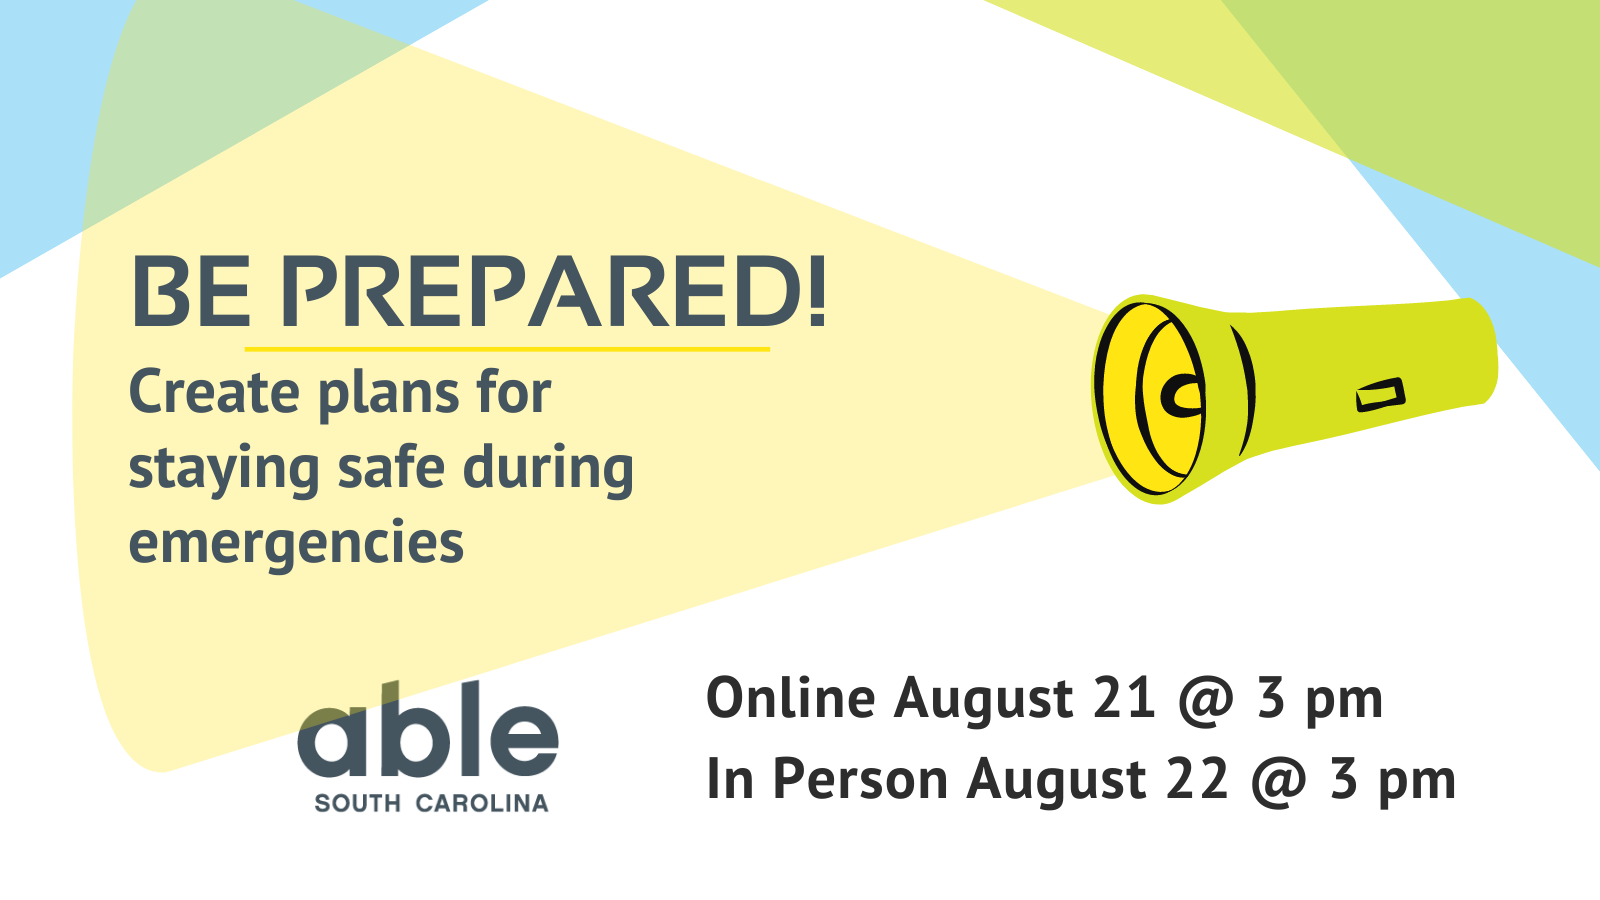 Graphic with white background and gray text reading,' Be prepared! Create plans for staying safe during emergencies. Online August 21 at 3 pm and in person August 22 at 3 pm. Able SC logo at base. Illustration of light green flashlight shining yellow light on text to the right.